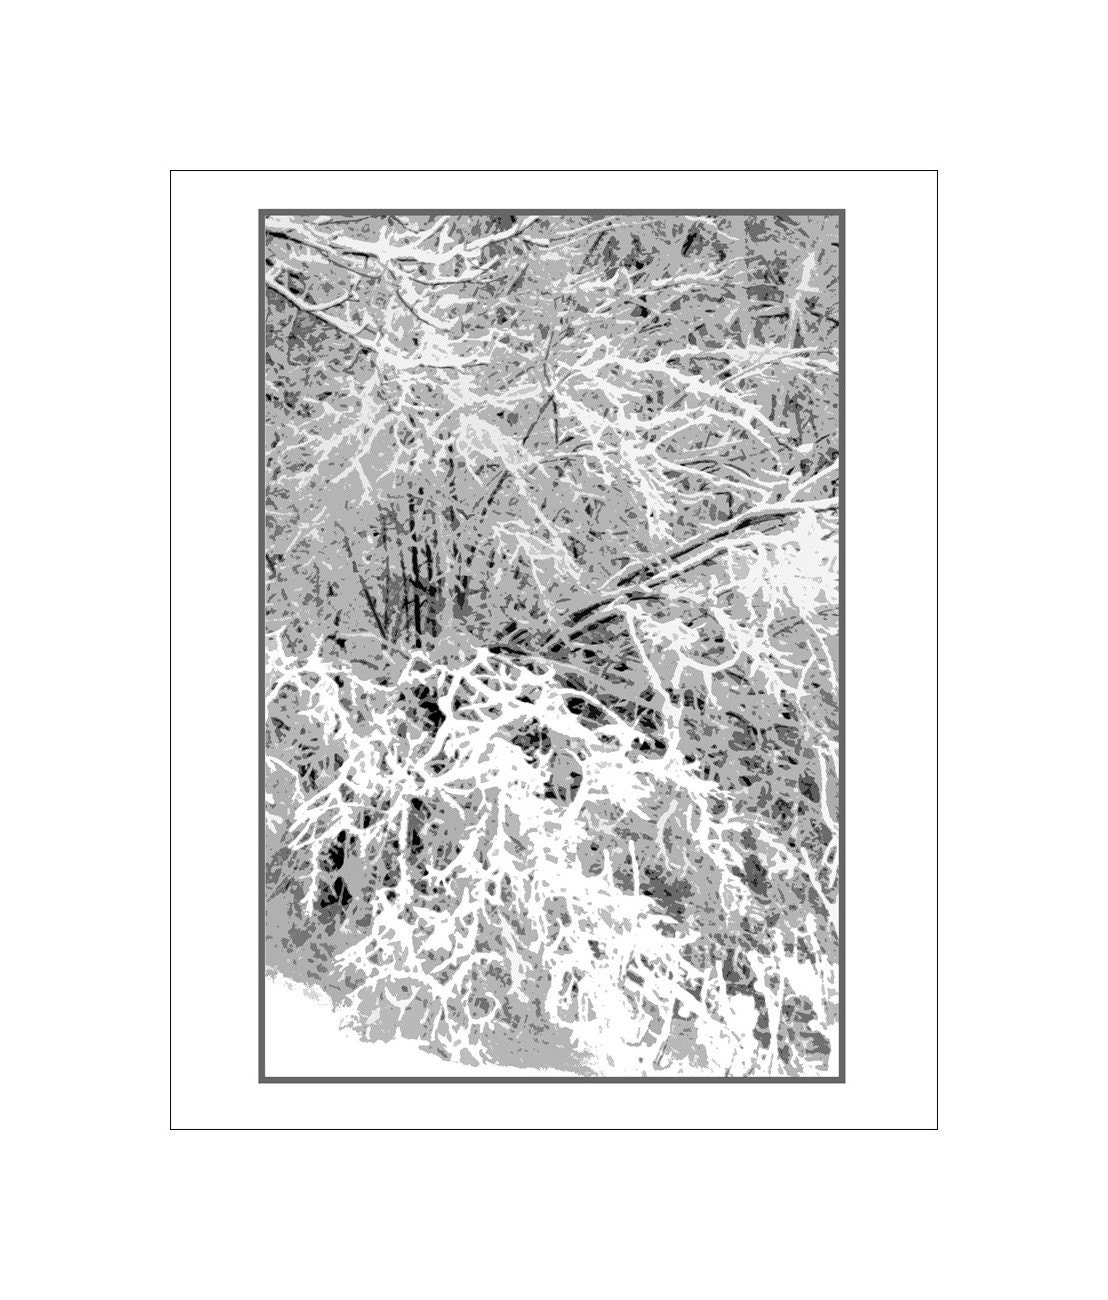 Snow Laden Branches,  Black And White Abstract Fine Art Photo, 16 x 20,  Winter's Lace, Maine Snowstorm,  Snow White Fantasy Photograph